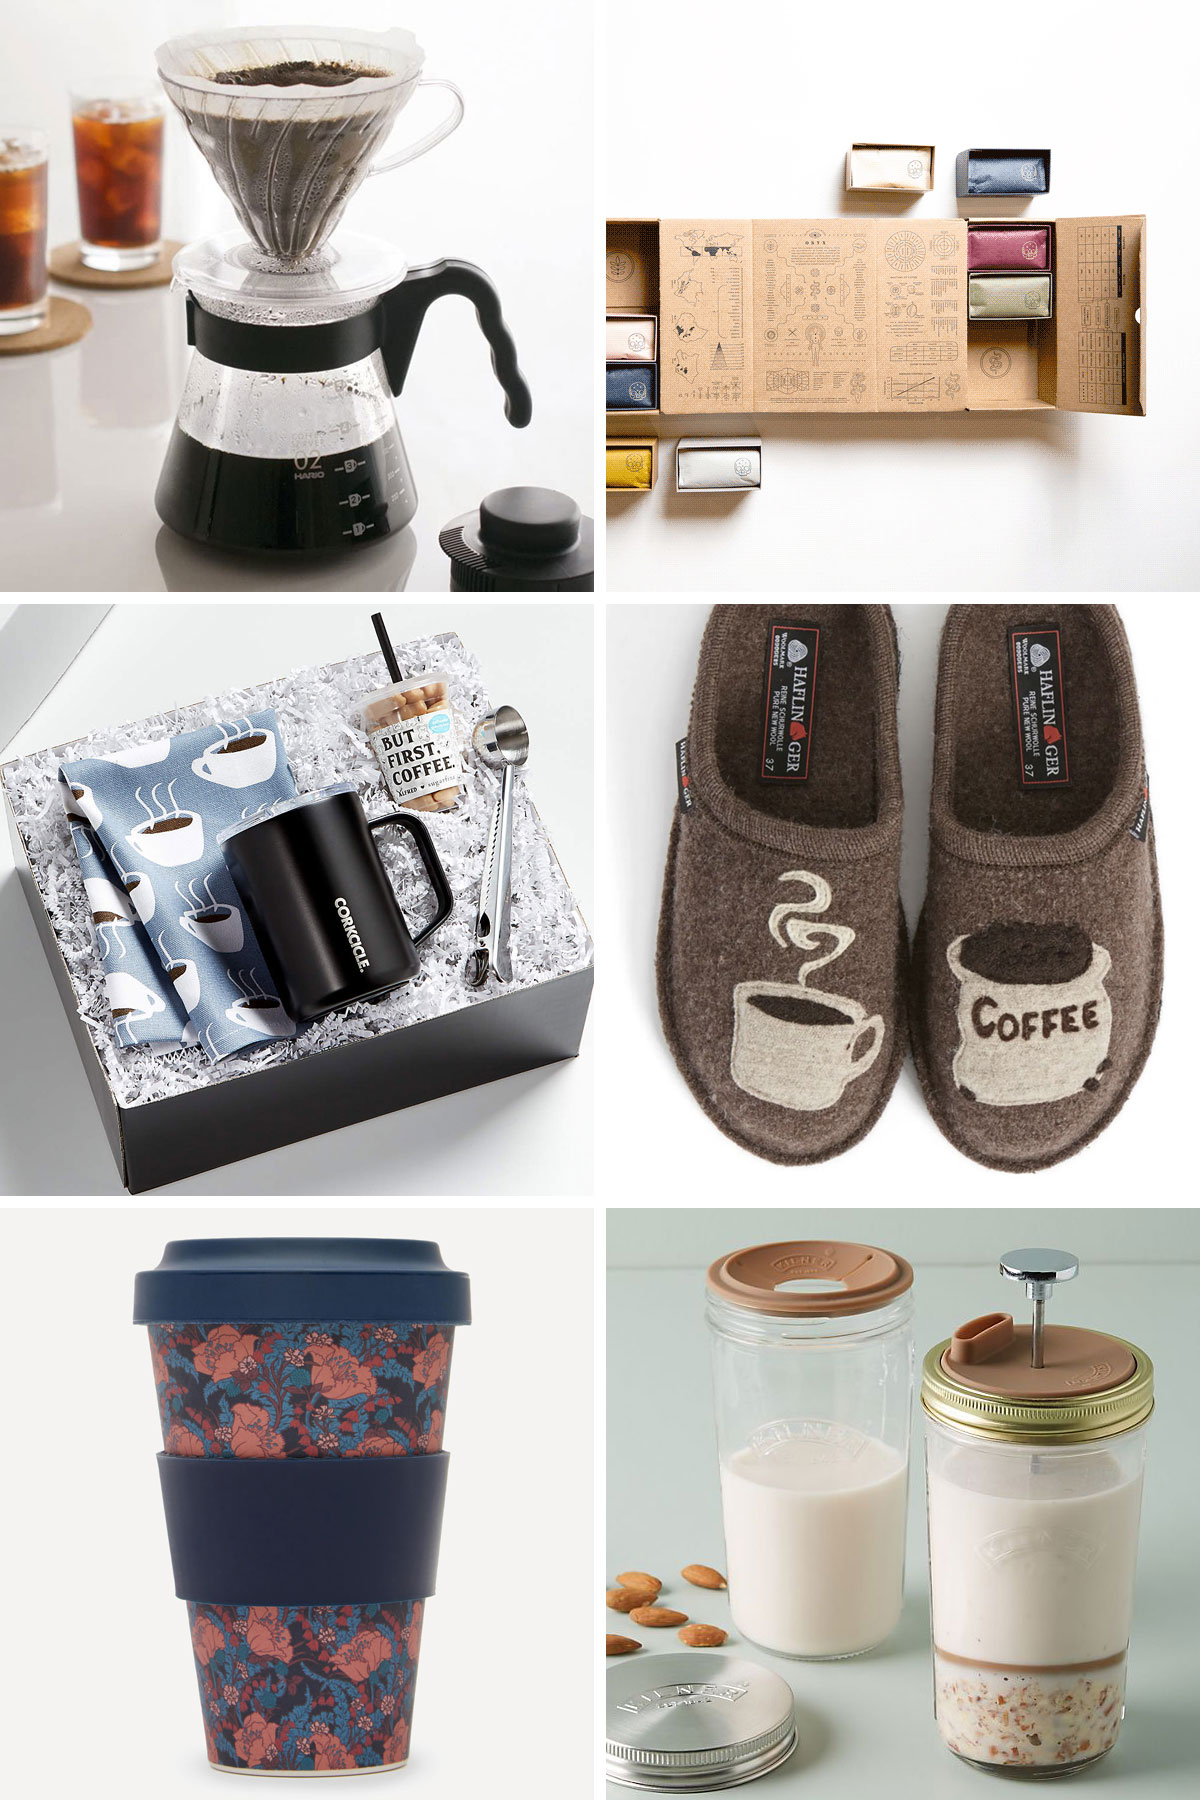 6 photos with 6 coffee gifts.